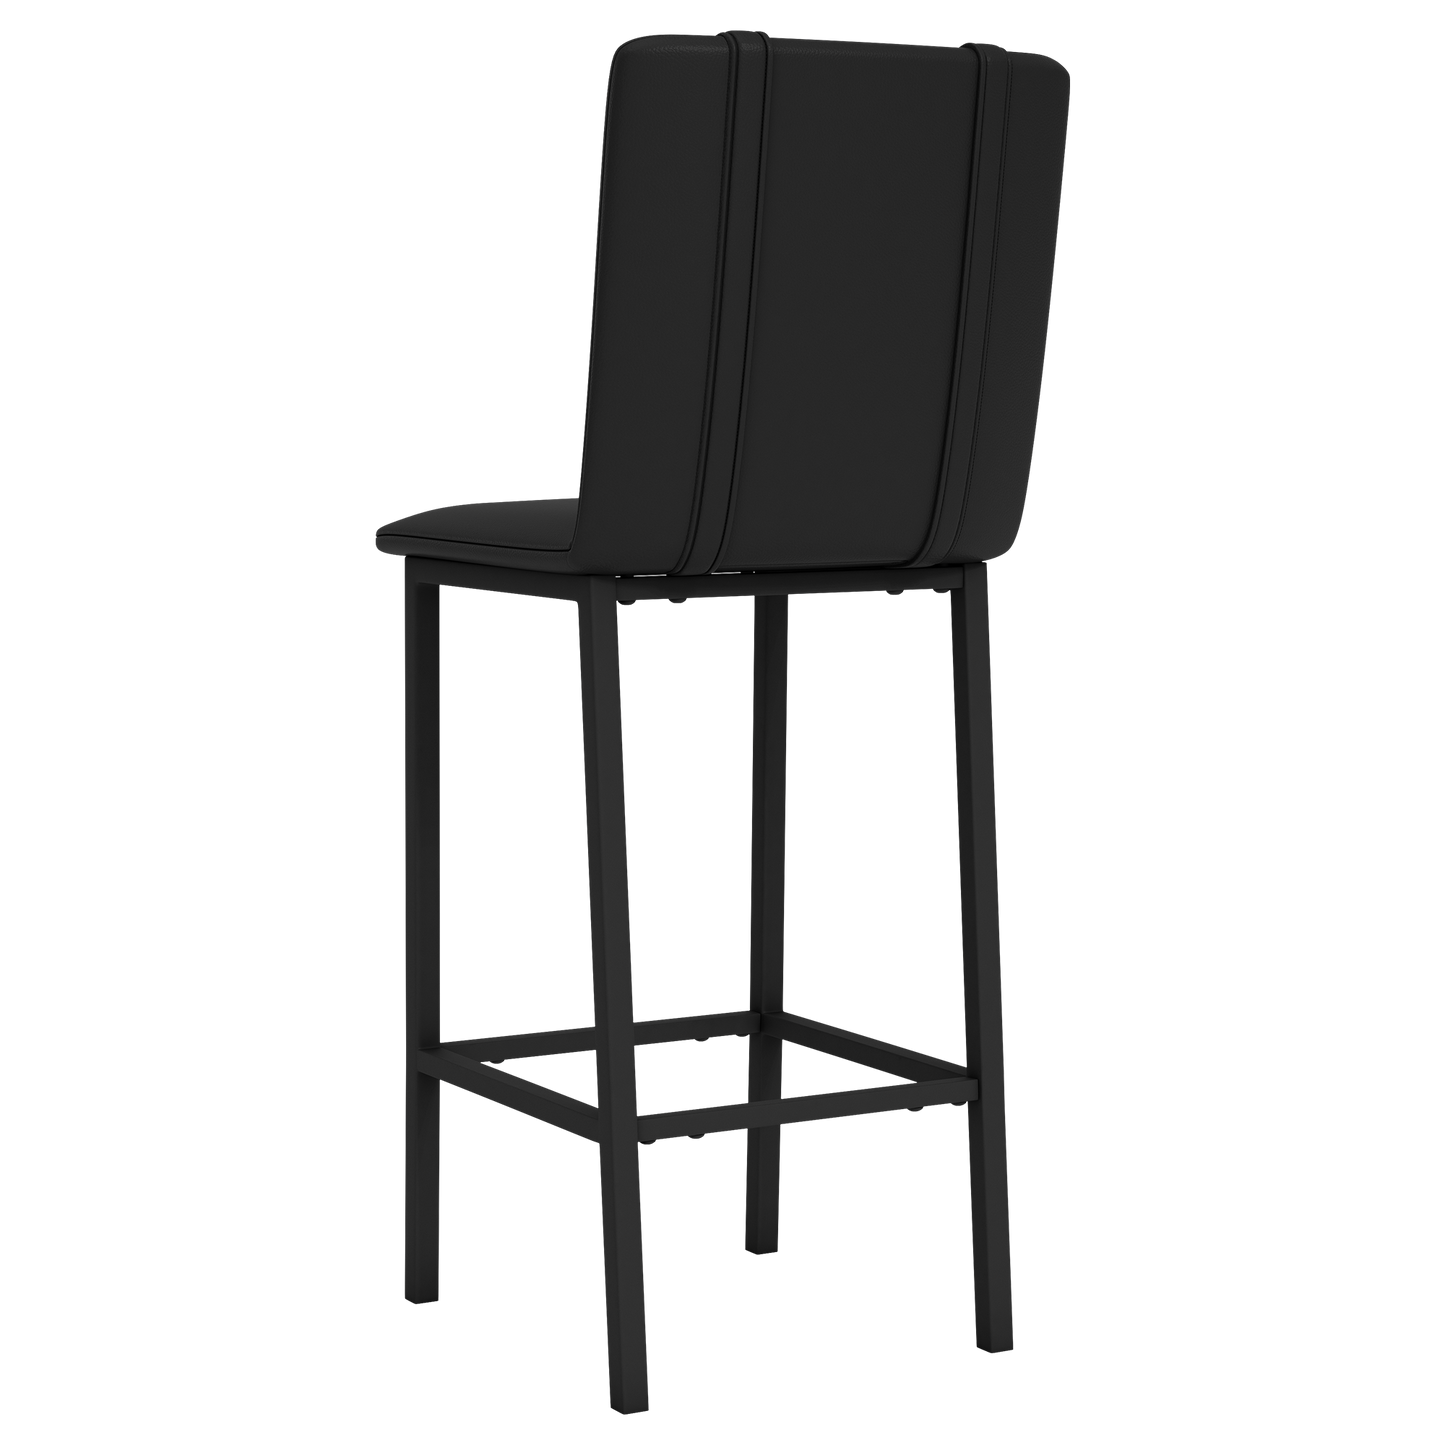 Bar Stool 500 with Montana State Bobcats Primary Logo Set of 2